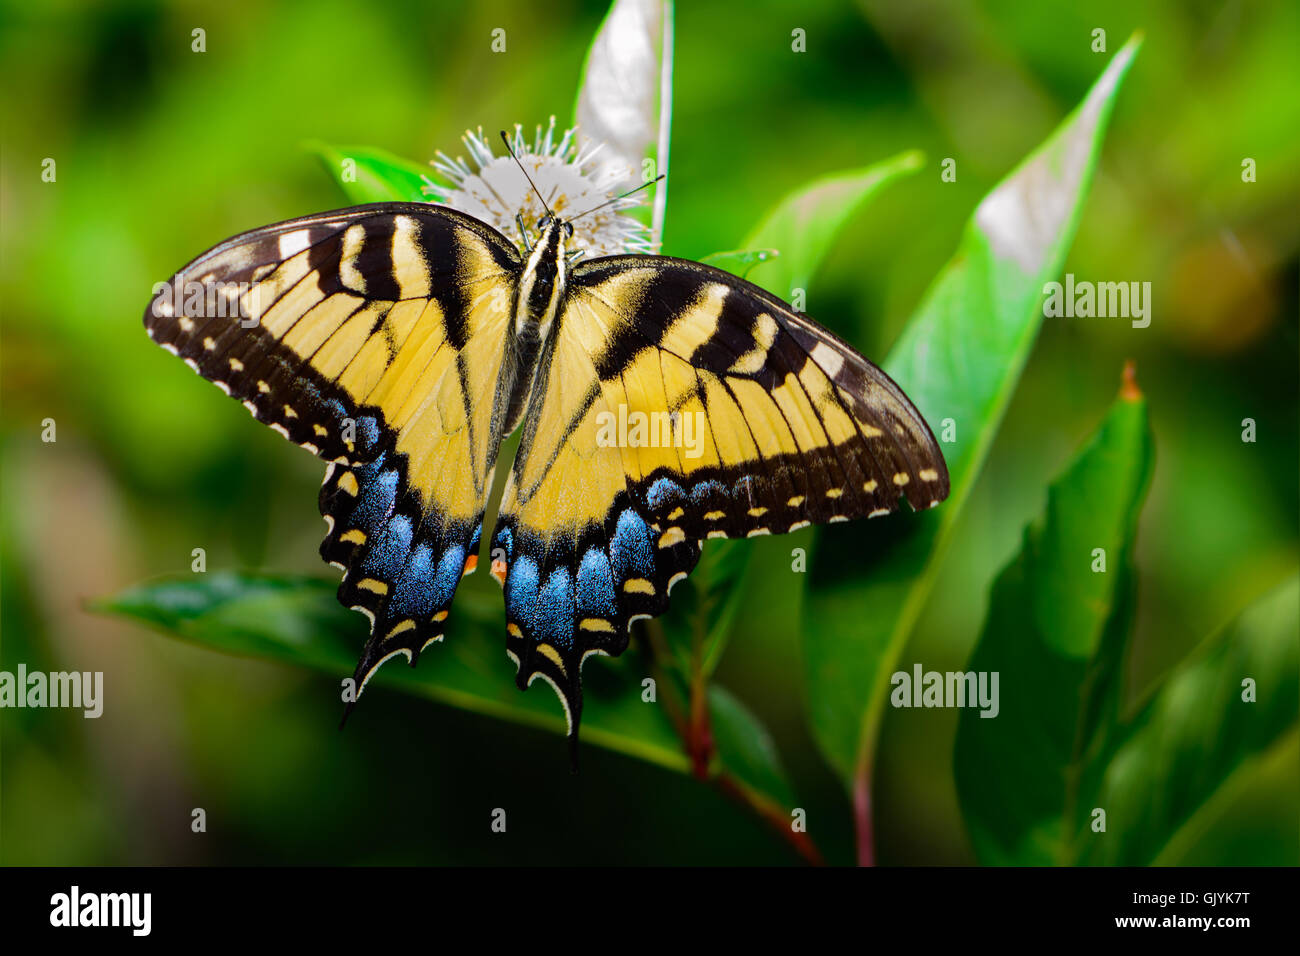 Eastern tiger swallowtail (Papilio glaucus) butterfly with vivid blue yellow and black. Top View Stock Photo